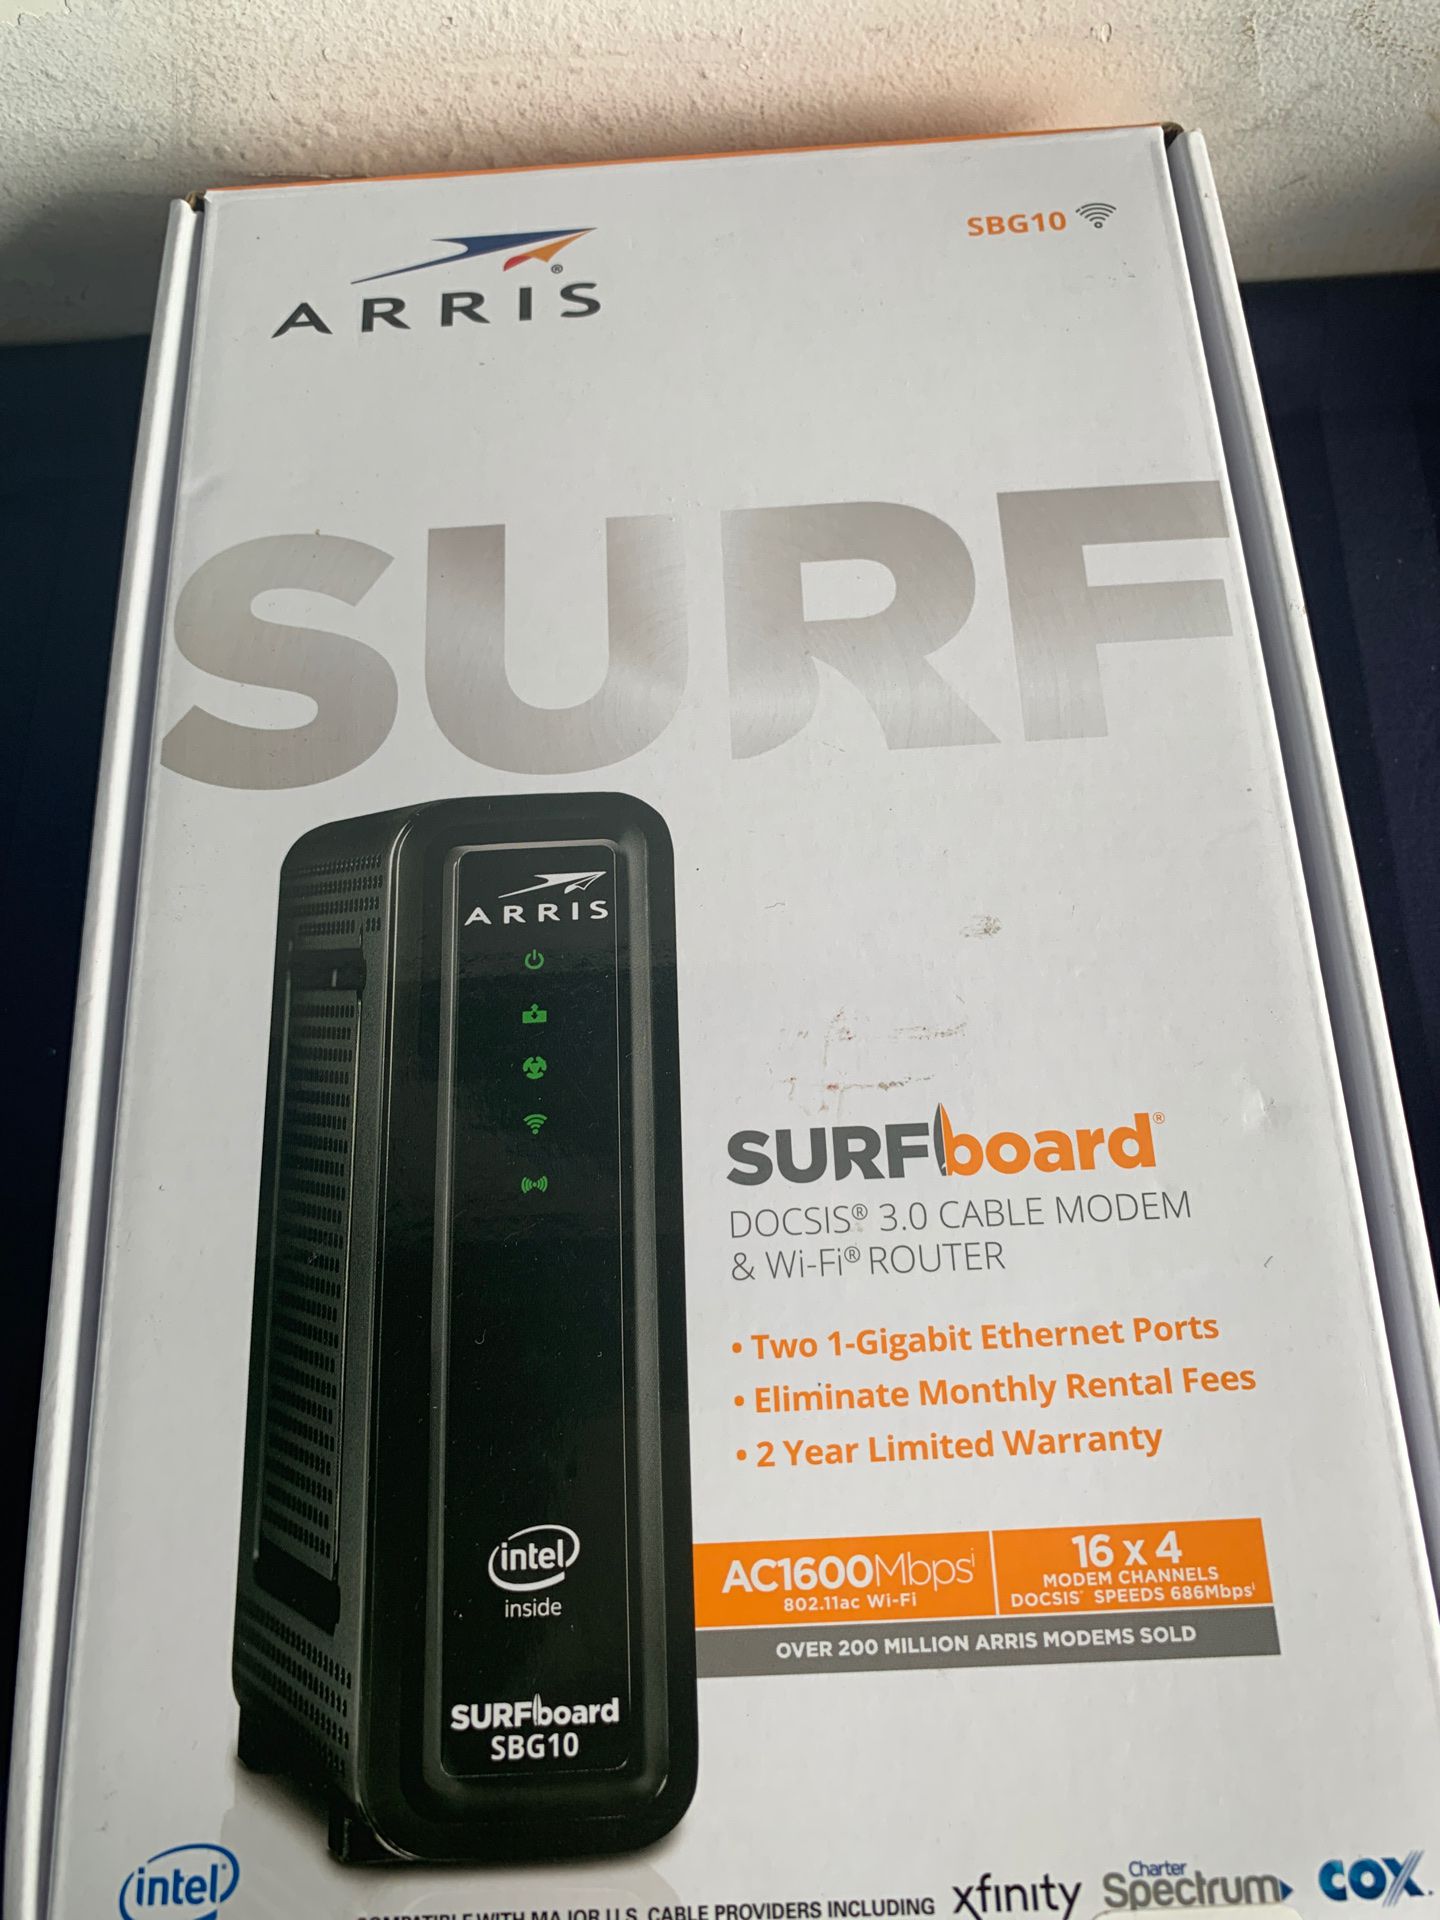 Arris Surfboard DOCSIS 3.0 Cable Modem & WiFi Router - SBG10